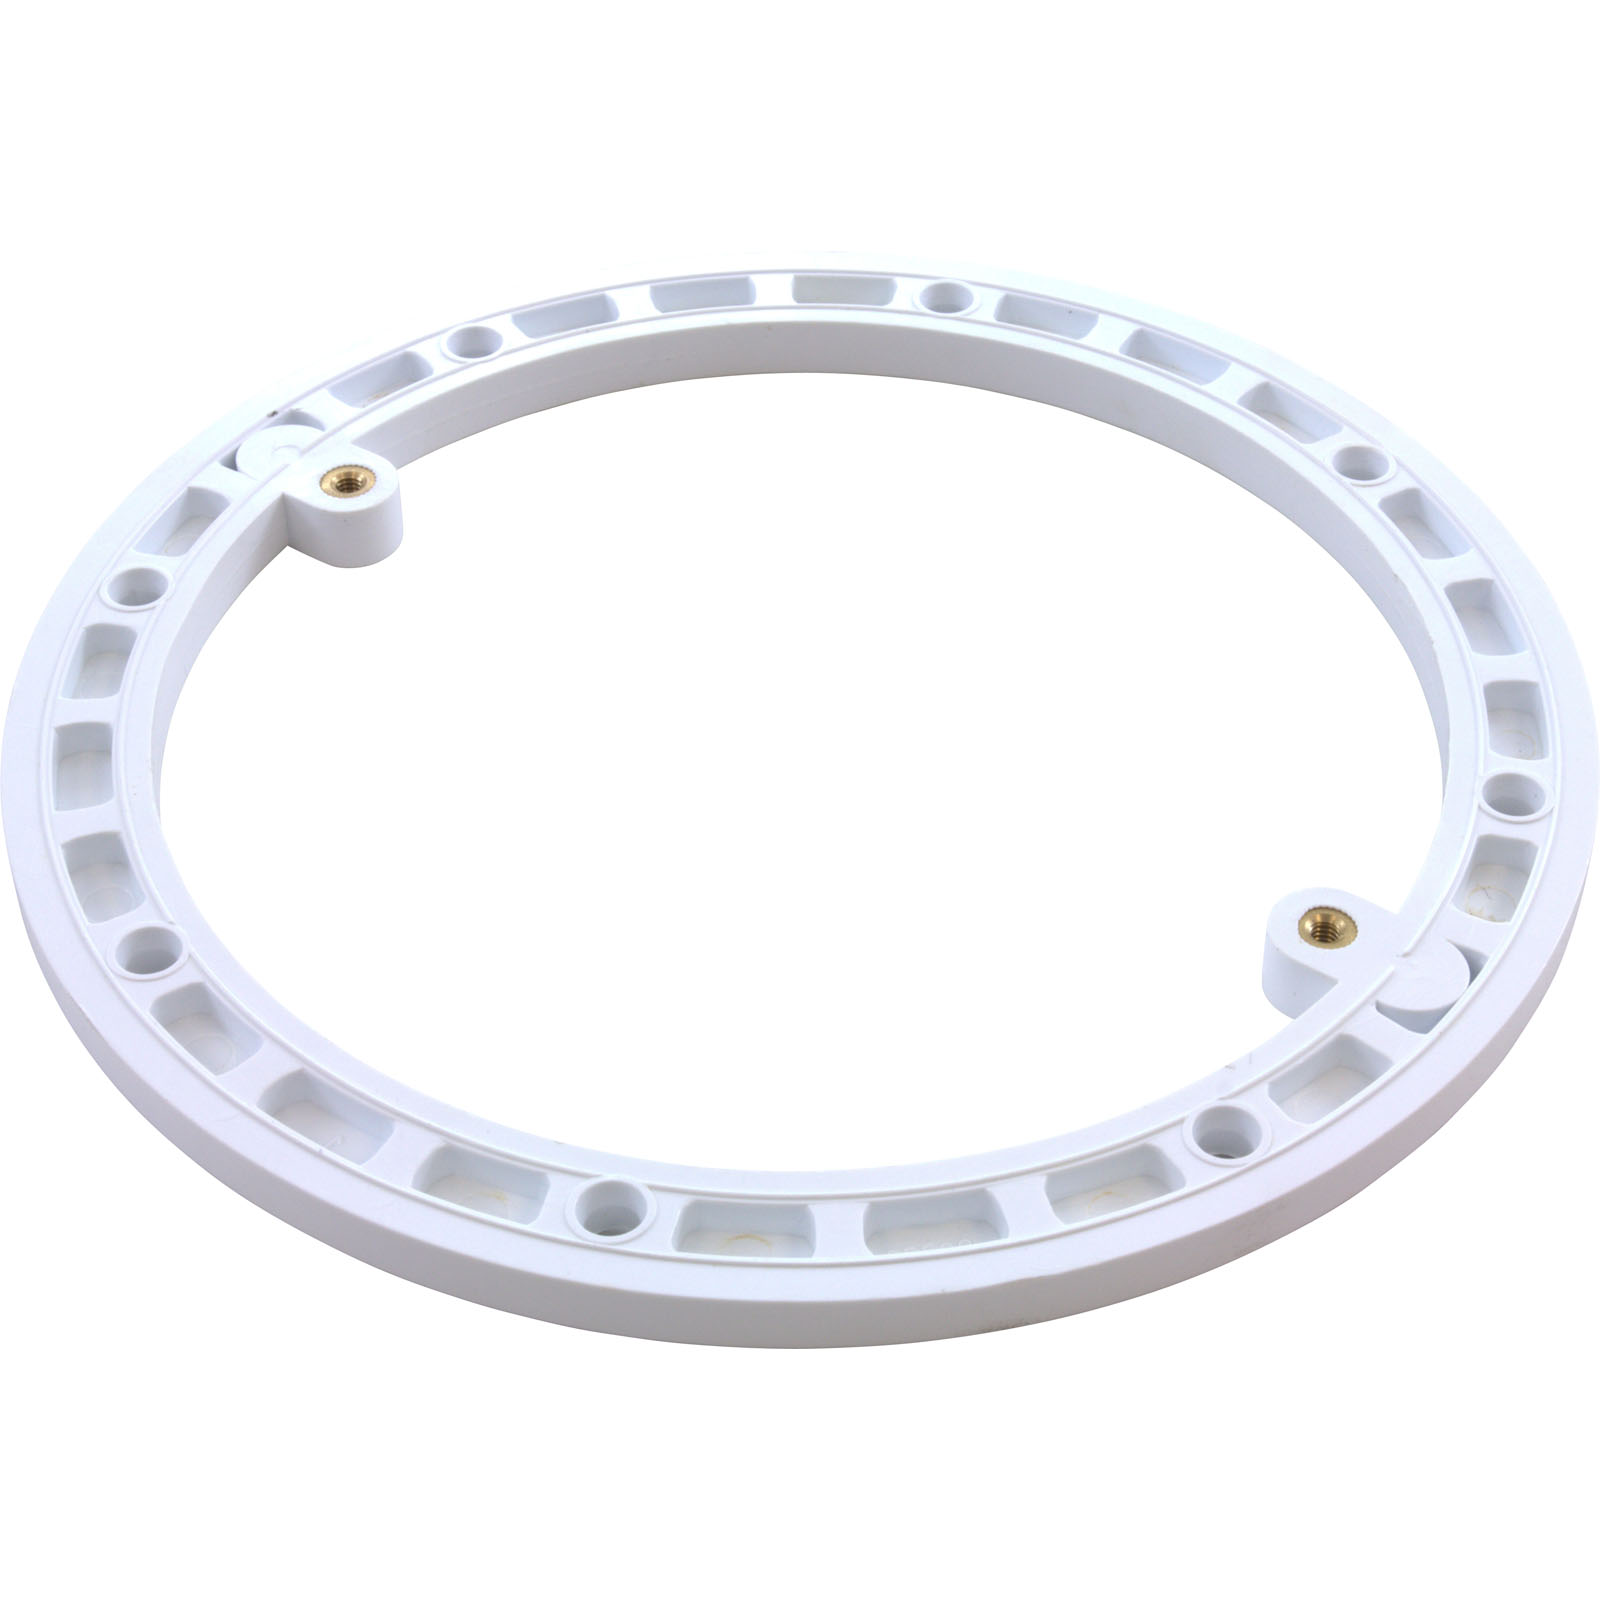 Picture of 25532-800-000 Main Drain Frame Generic 7-1/4